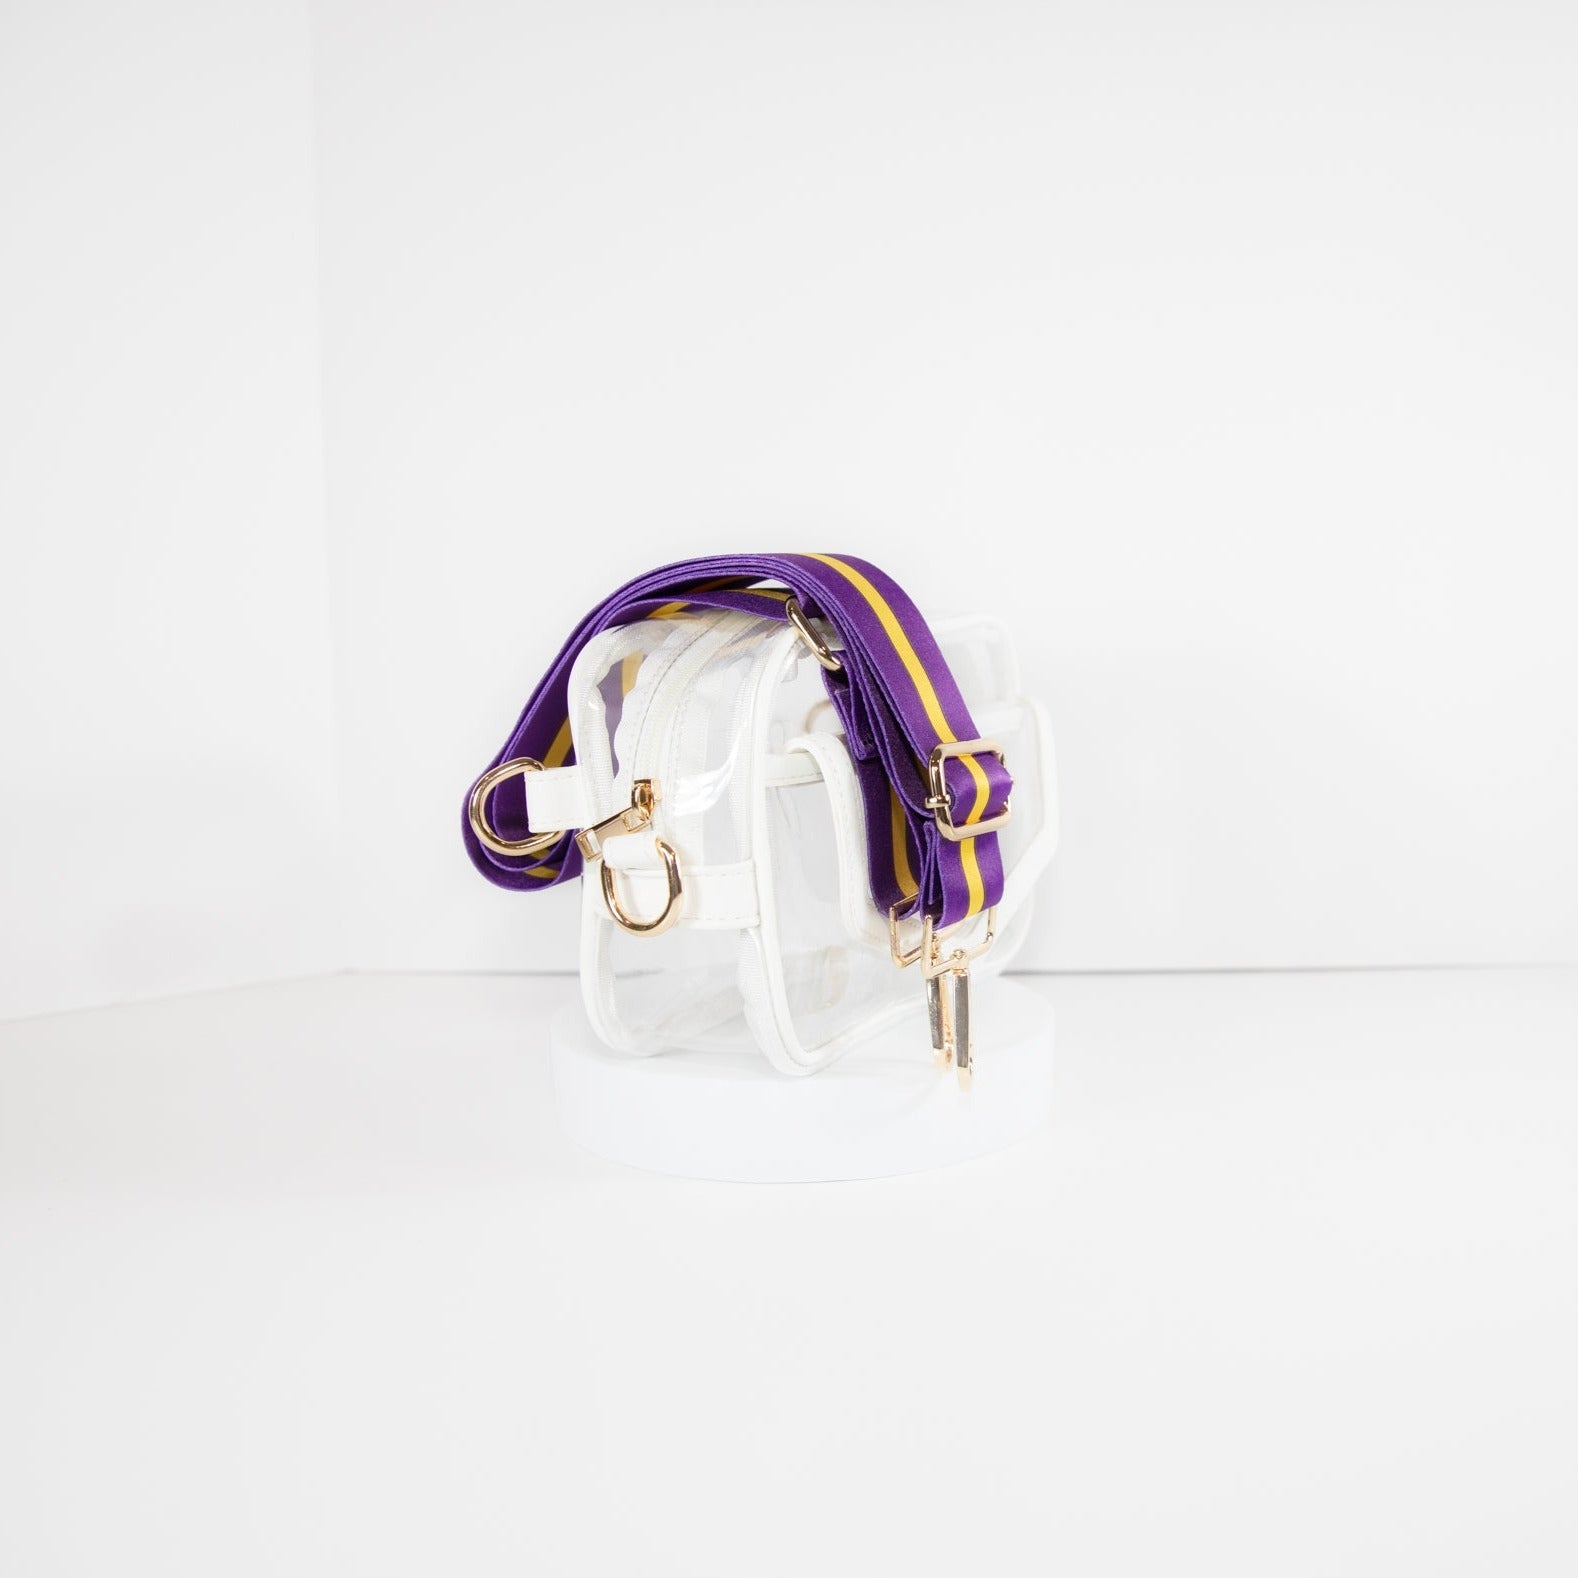 Clear Stadium Bag in white leather trim, side facing, with strap colors for LSU Tiger fans.